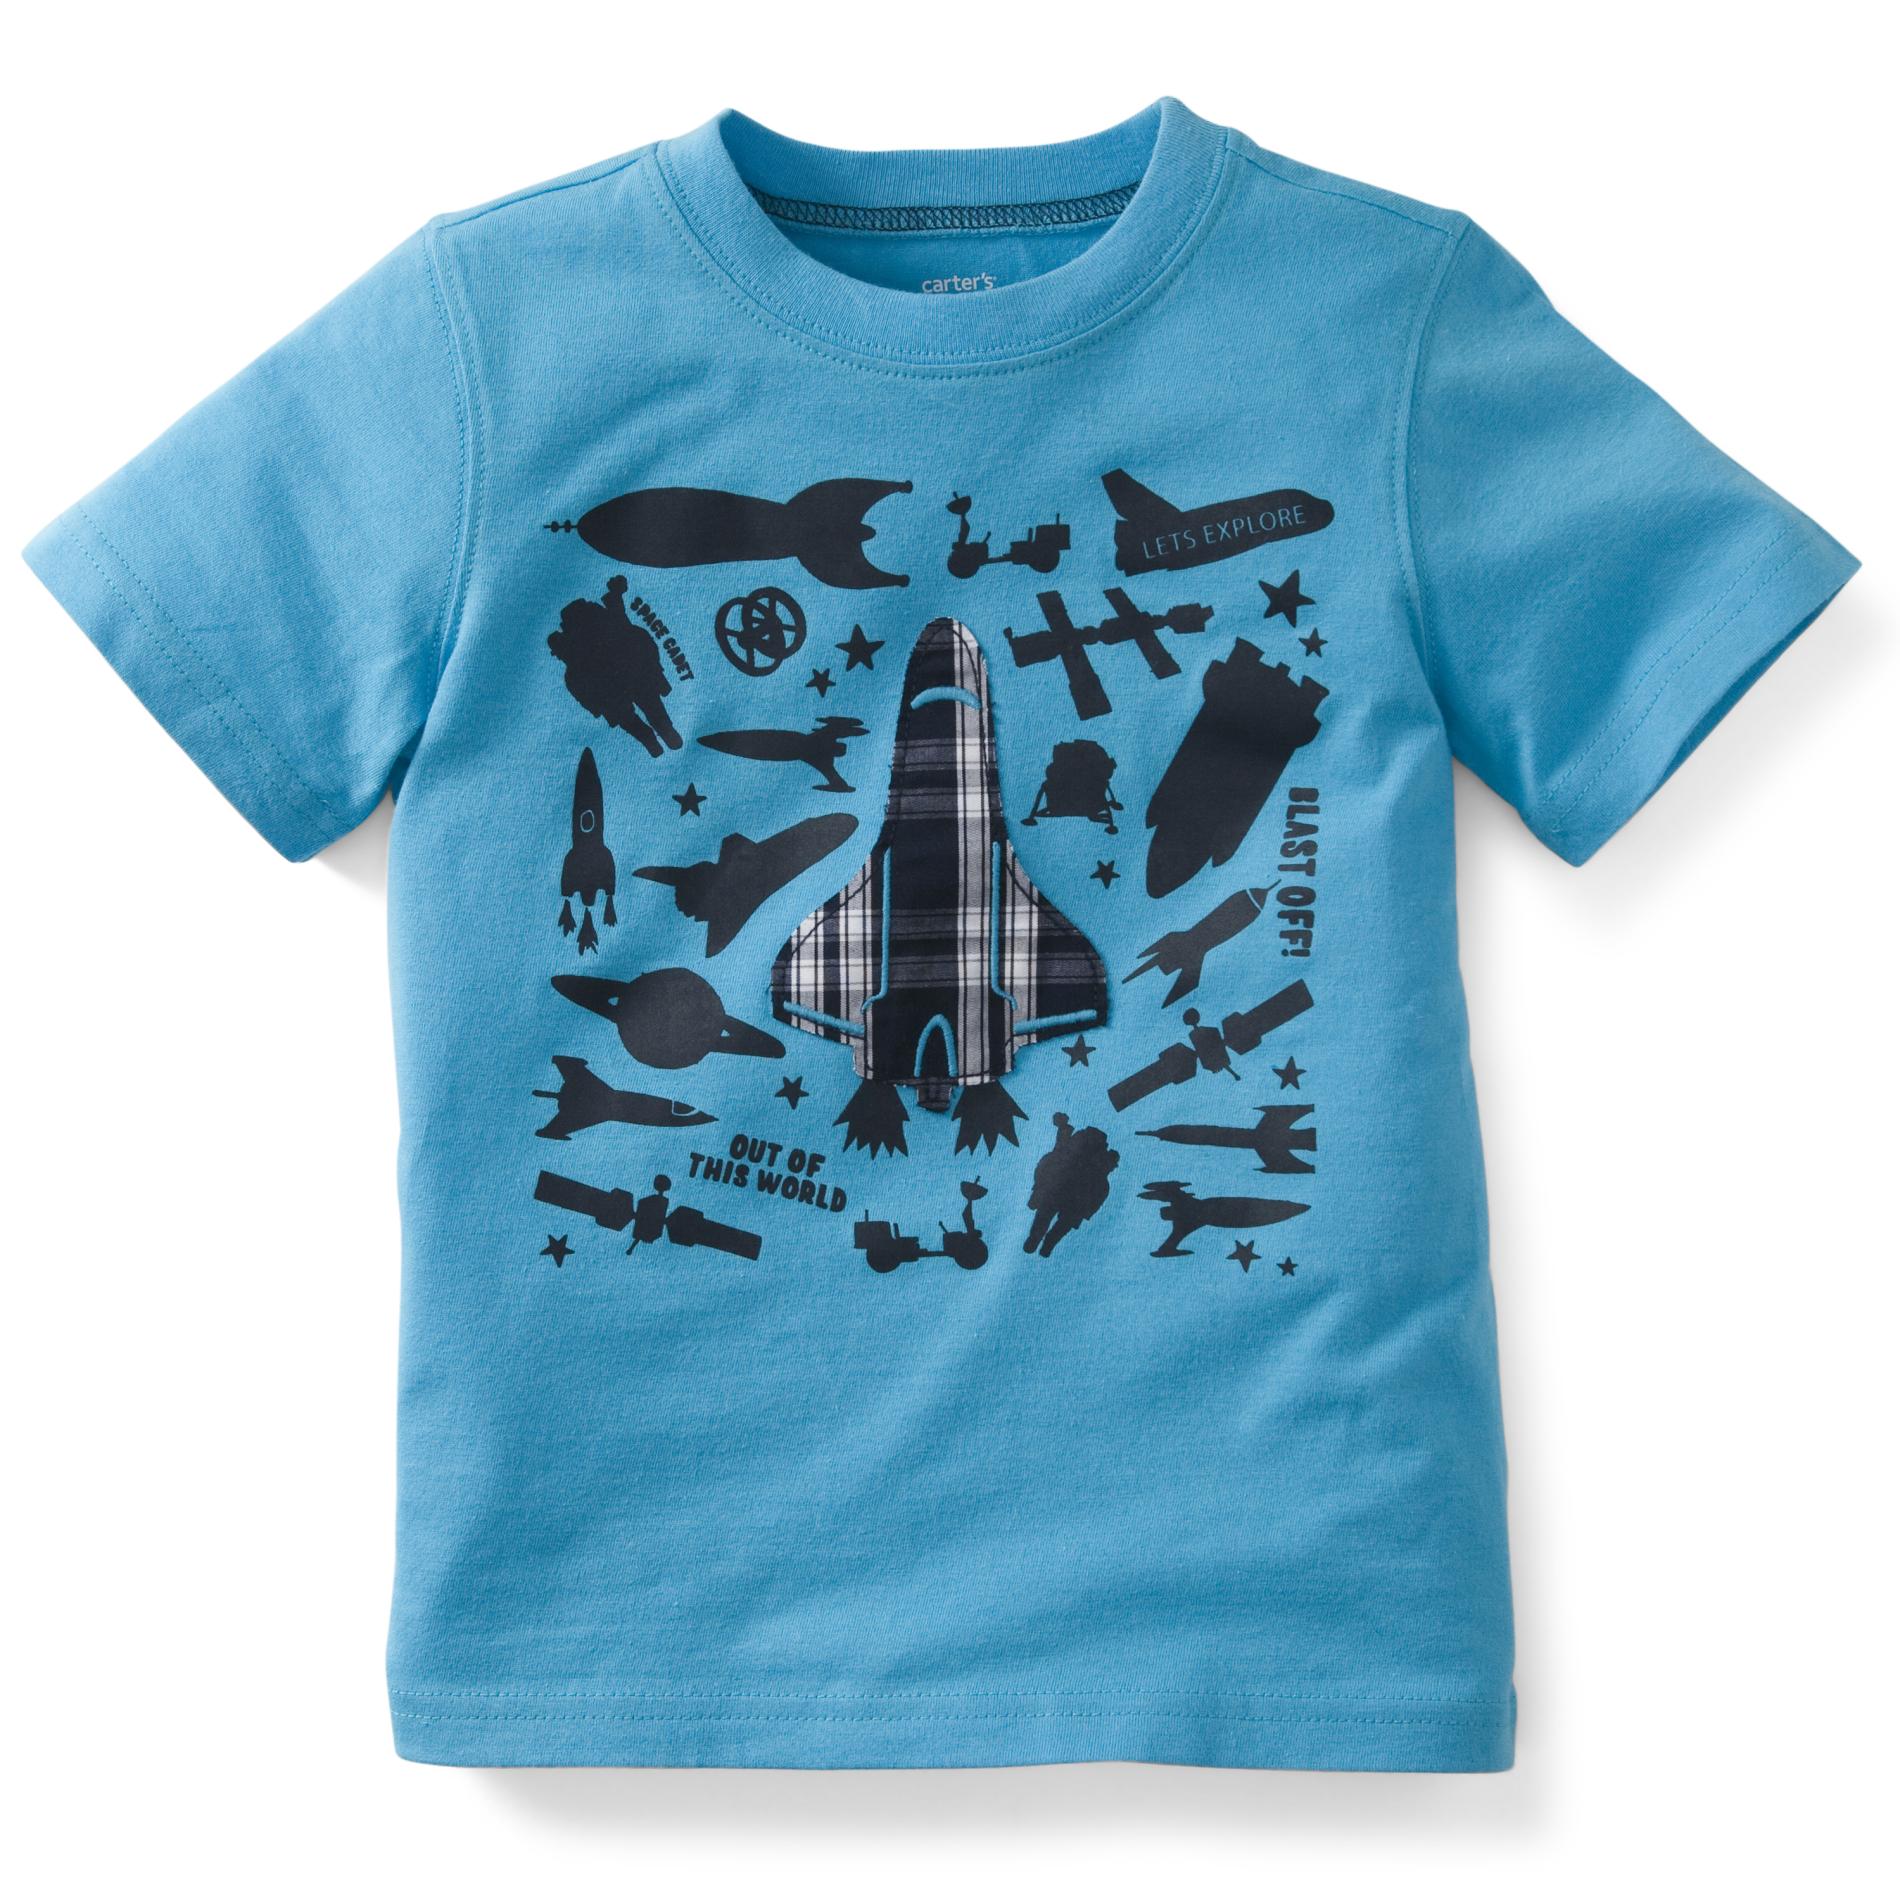 Carter's Boy's Graphic T-Shirt - Outer Space